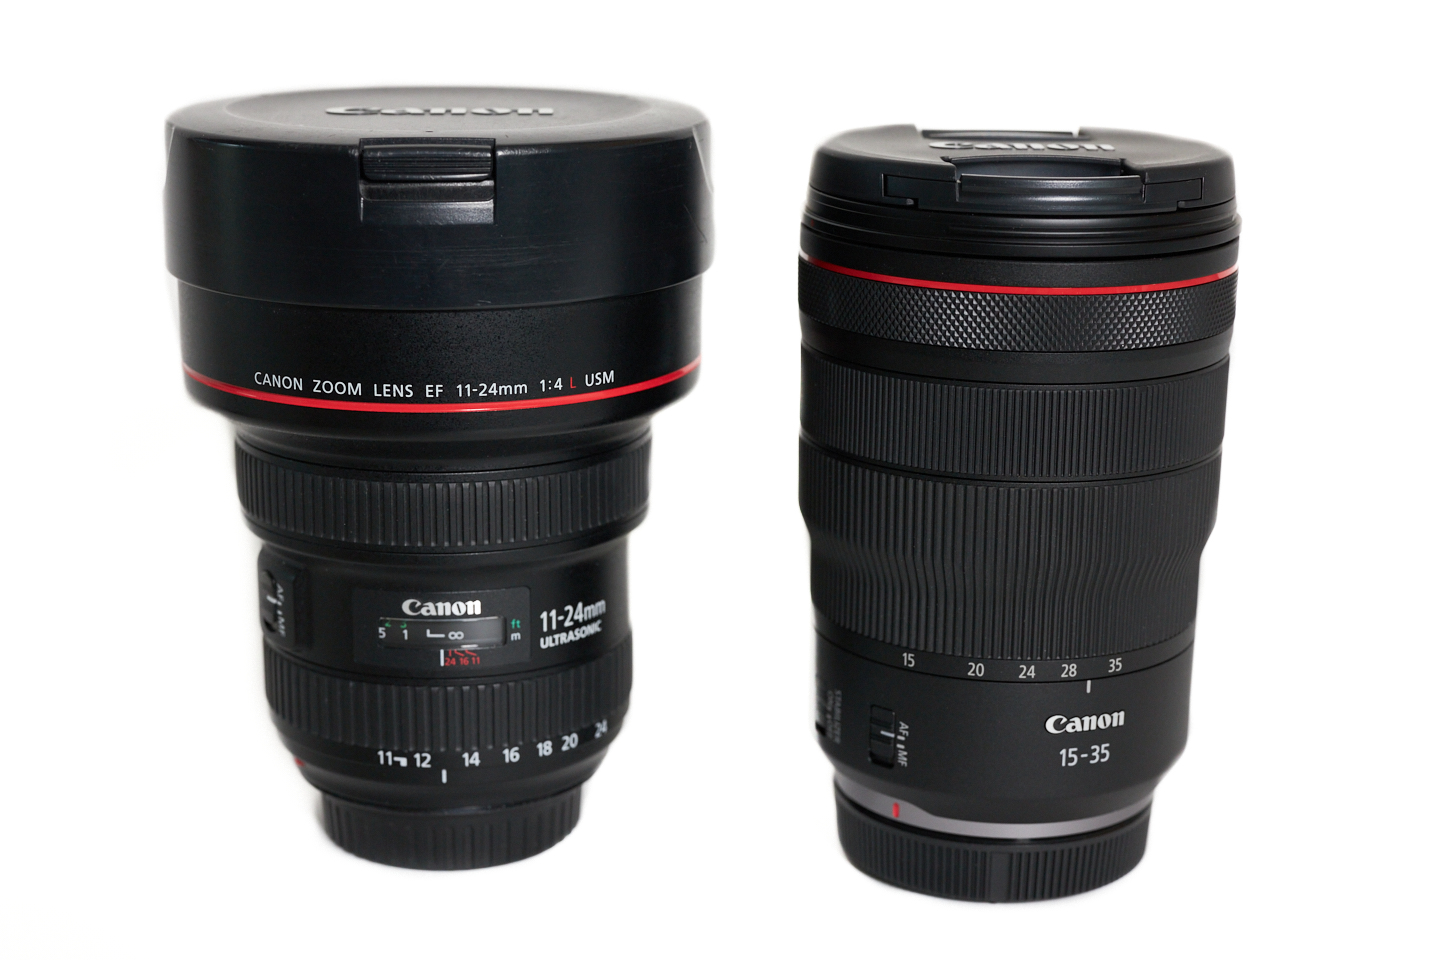 EF 11-24mm (left) and RF 15-35mm (right)